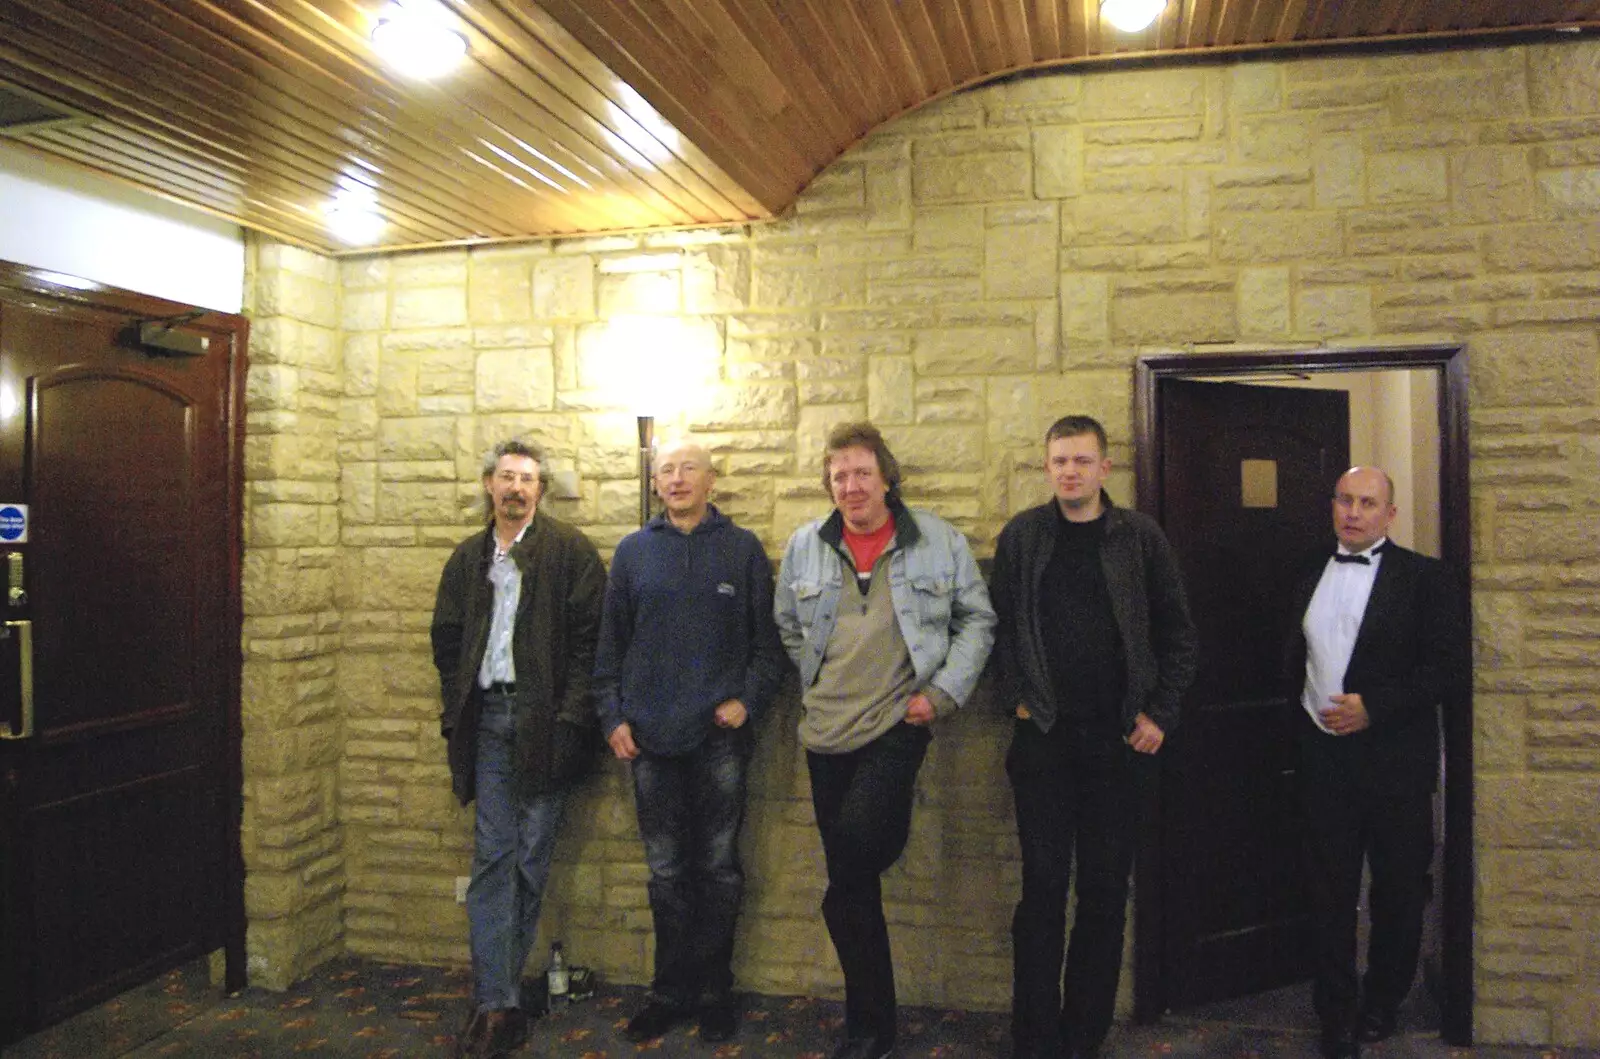 Hanging around by the bogs, from The BBs On Tour, Gatwick Copthorne, West Sussex - 24th November 2007